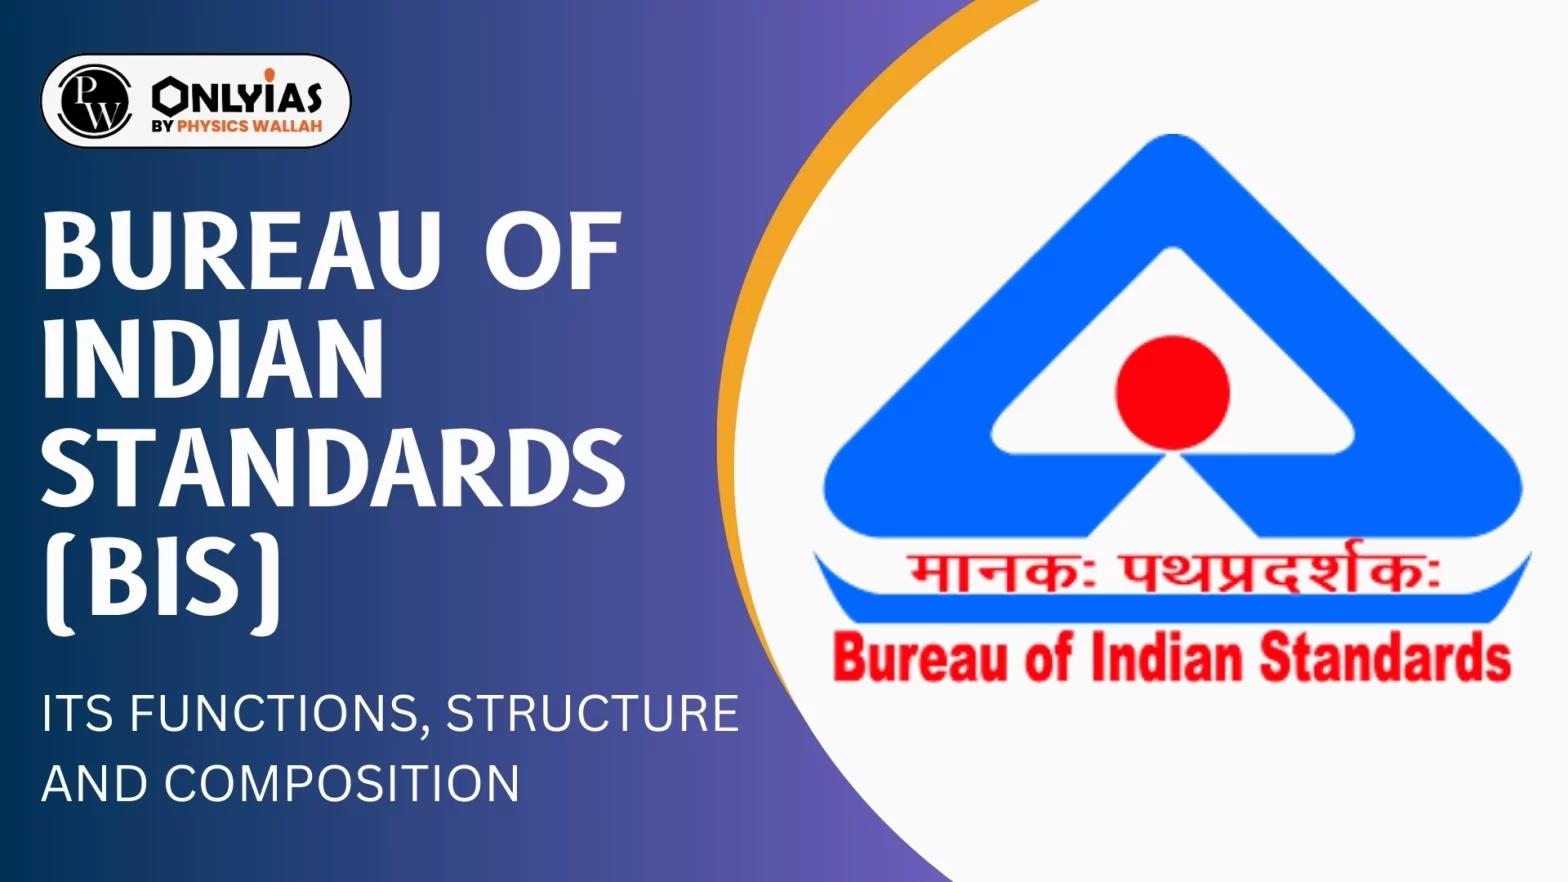 Bureau of Indian Standards (BIS): Its Functions, Structure and Composition